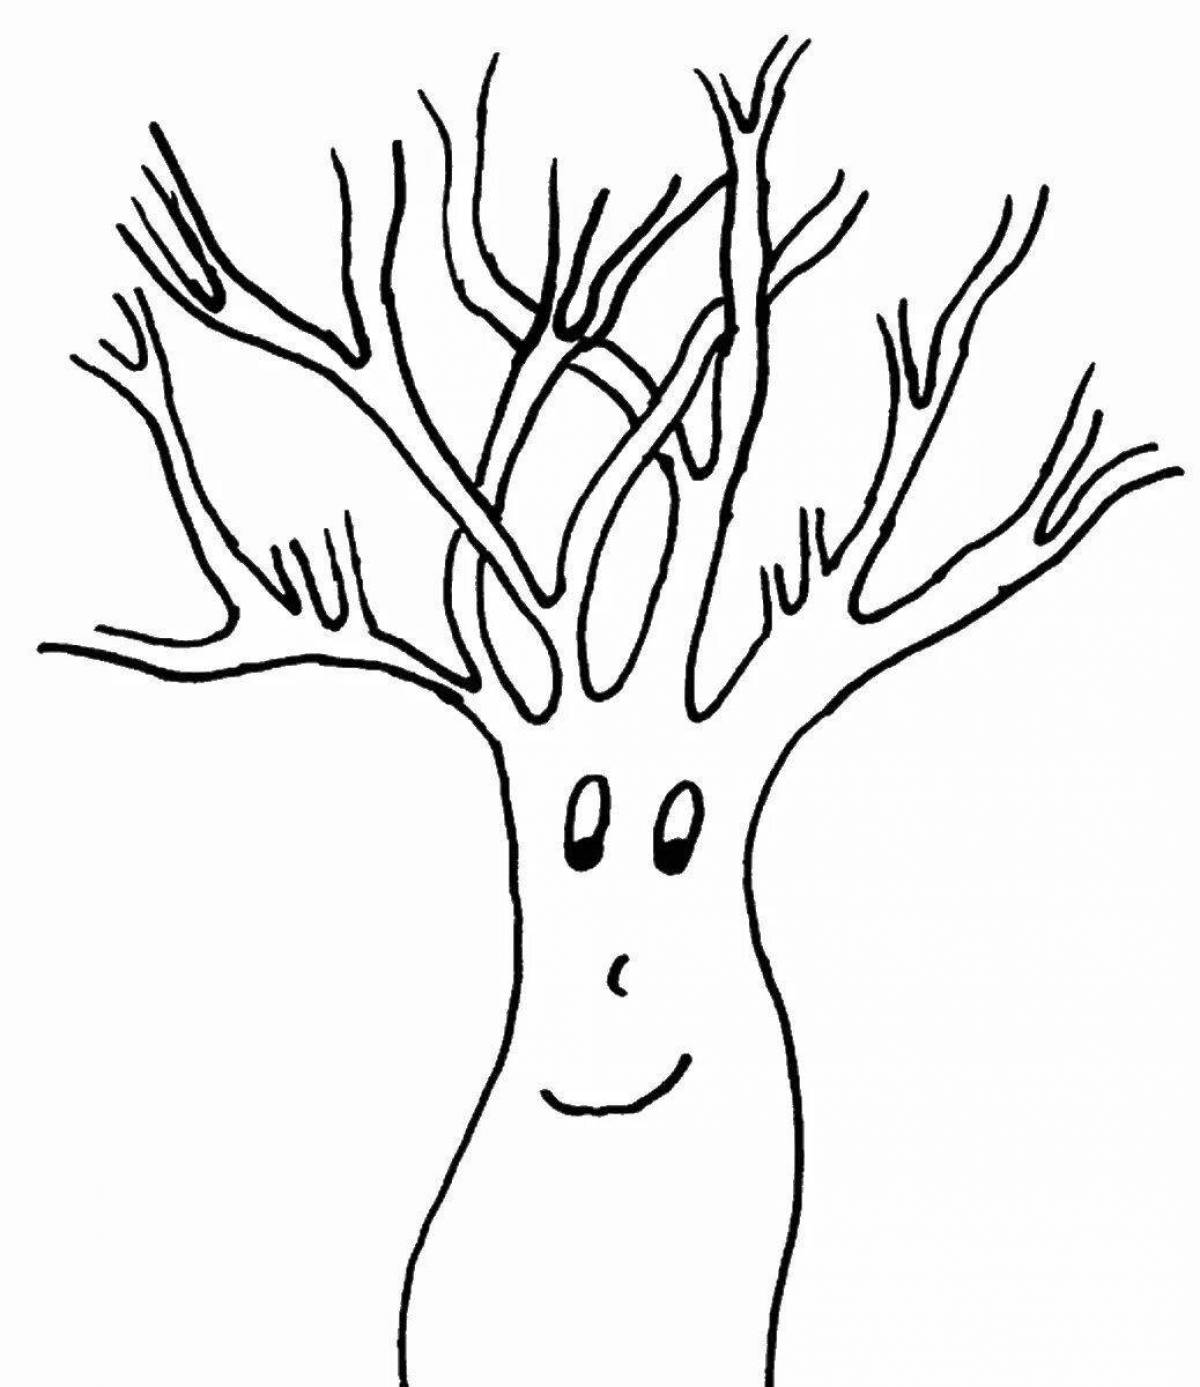 Joyful tree trunk coloring page for little ones